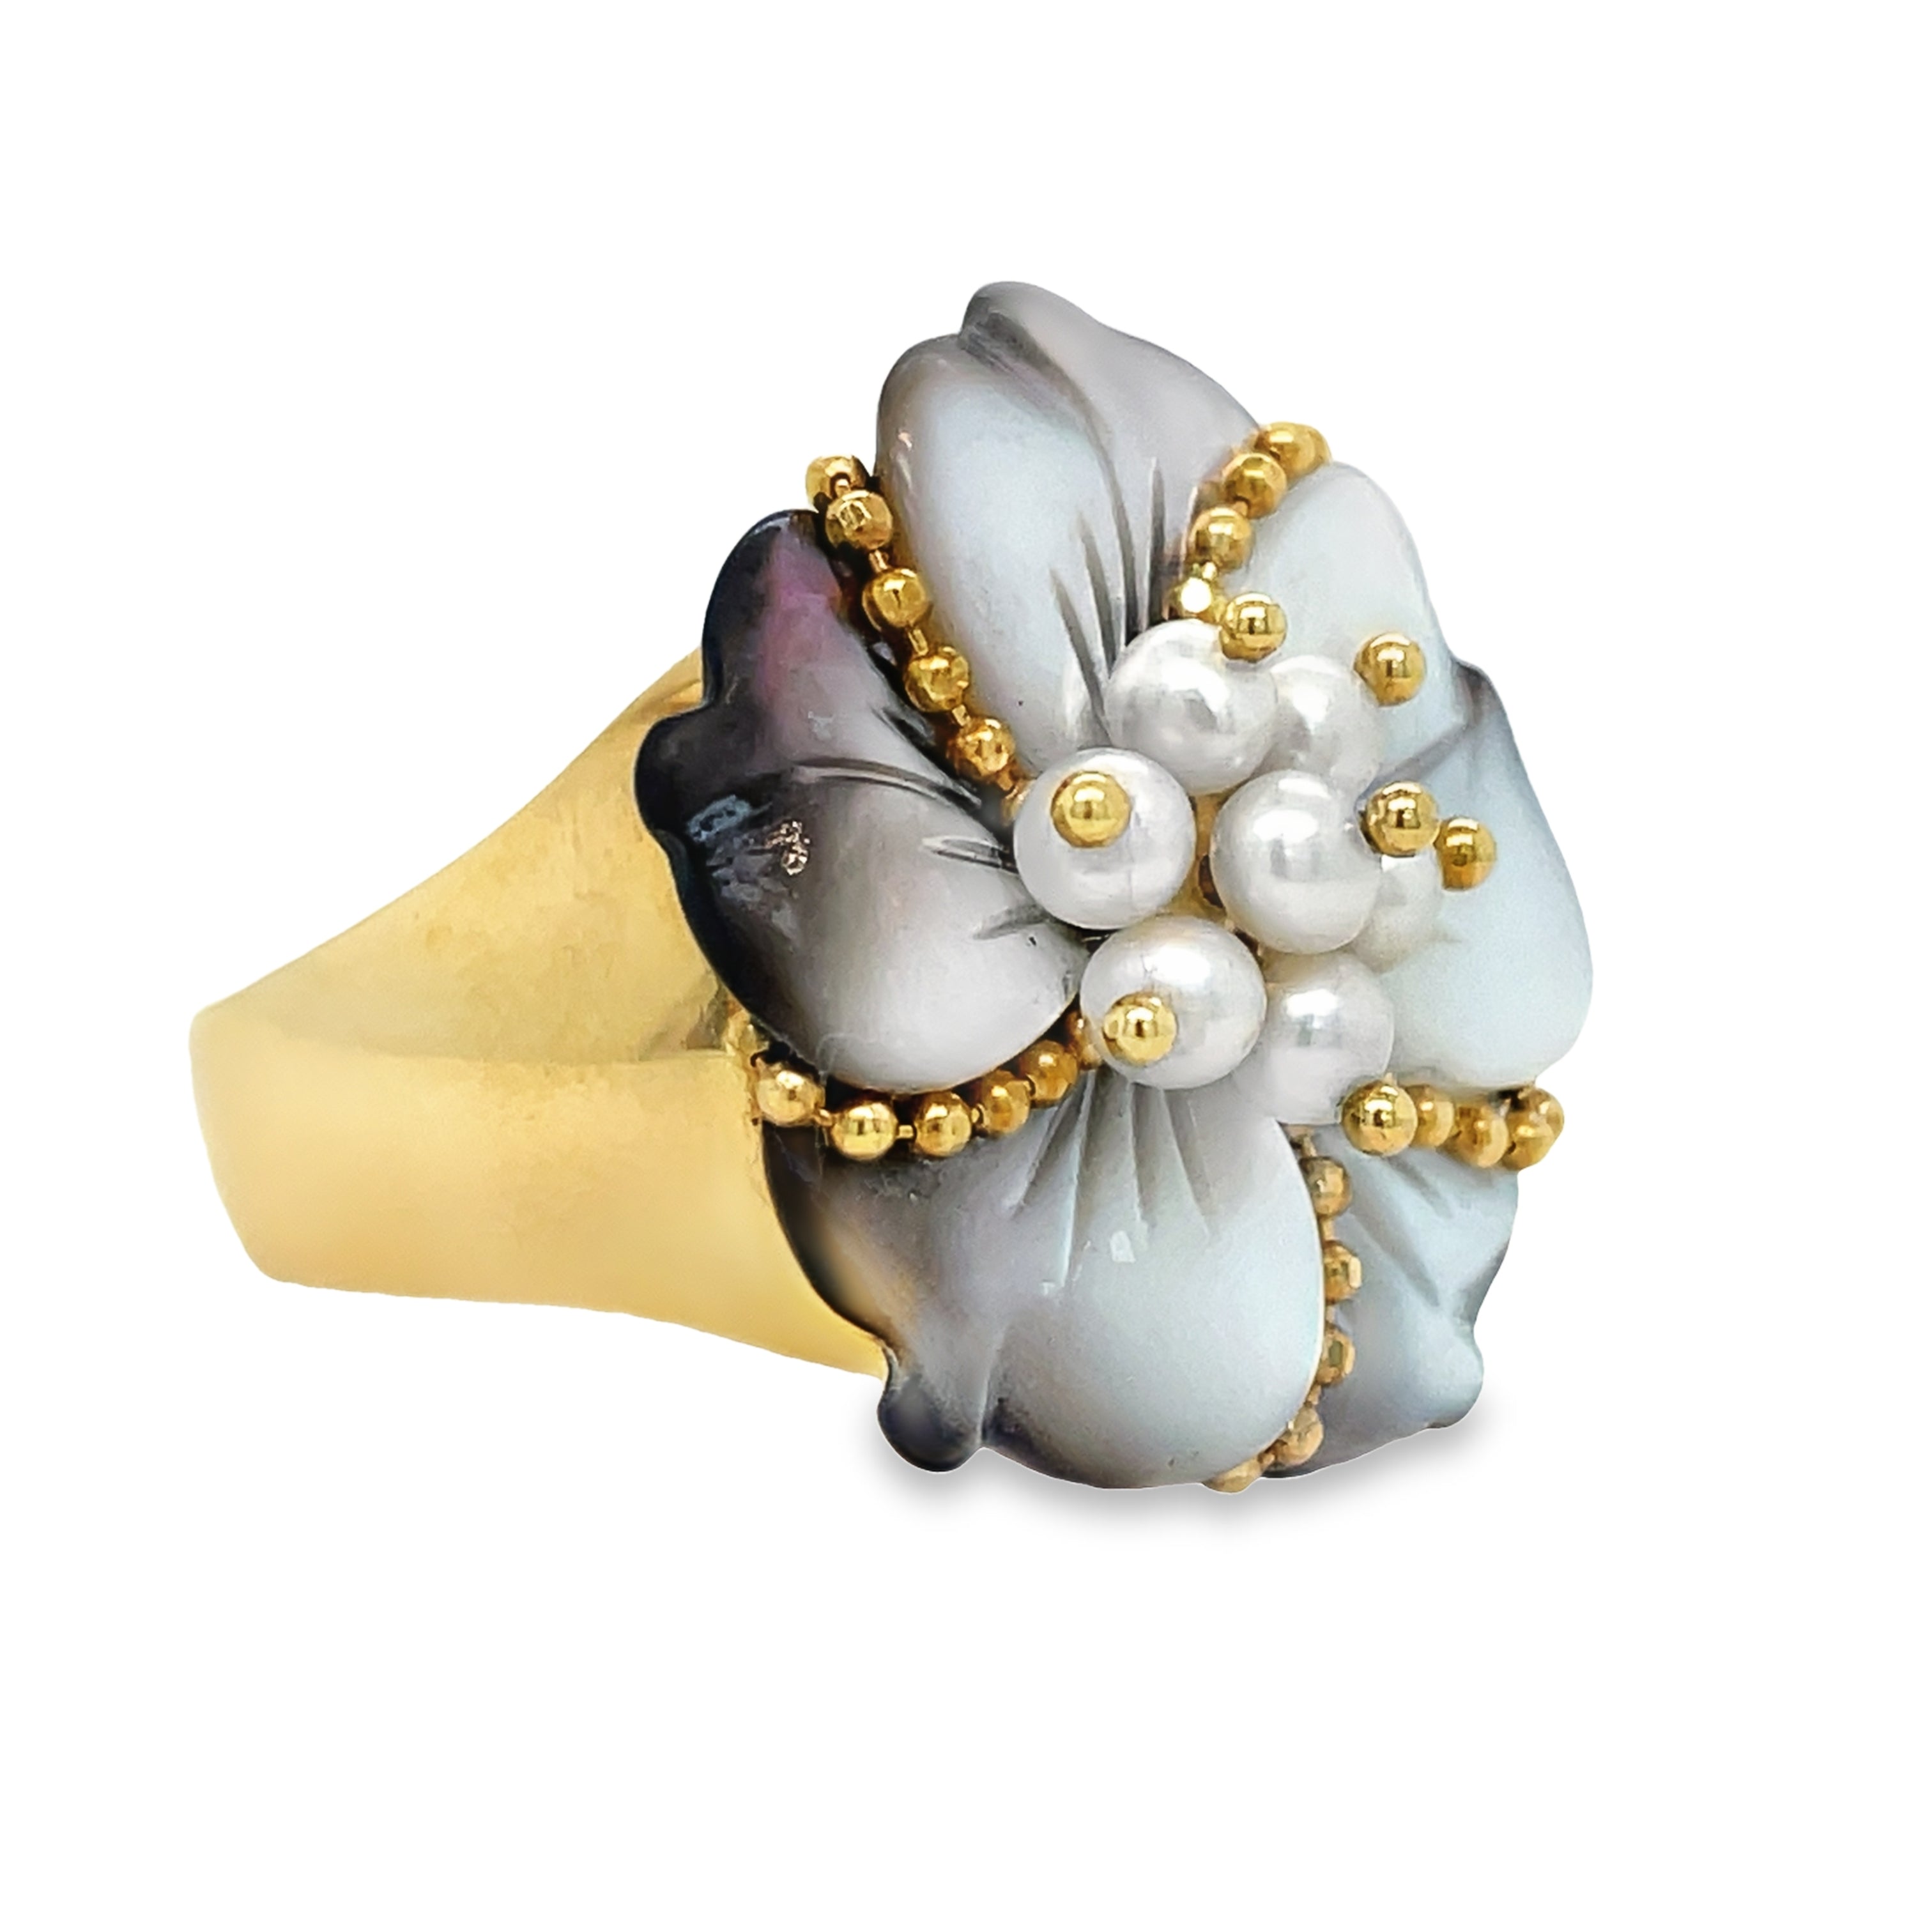 This exquisite ring features six mother of pearl petals and seven small pearls encased in 18k yellow gold. The delicate yellow gold trim adds a touch of sophistication to the ring. Perfect for adding a touch of elegance to any outfit. Available in size 6.5.